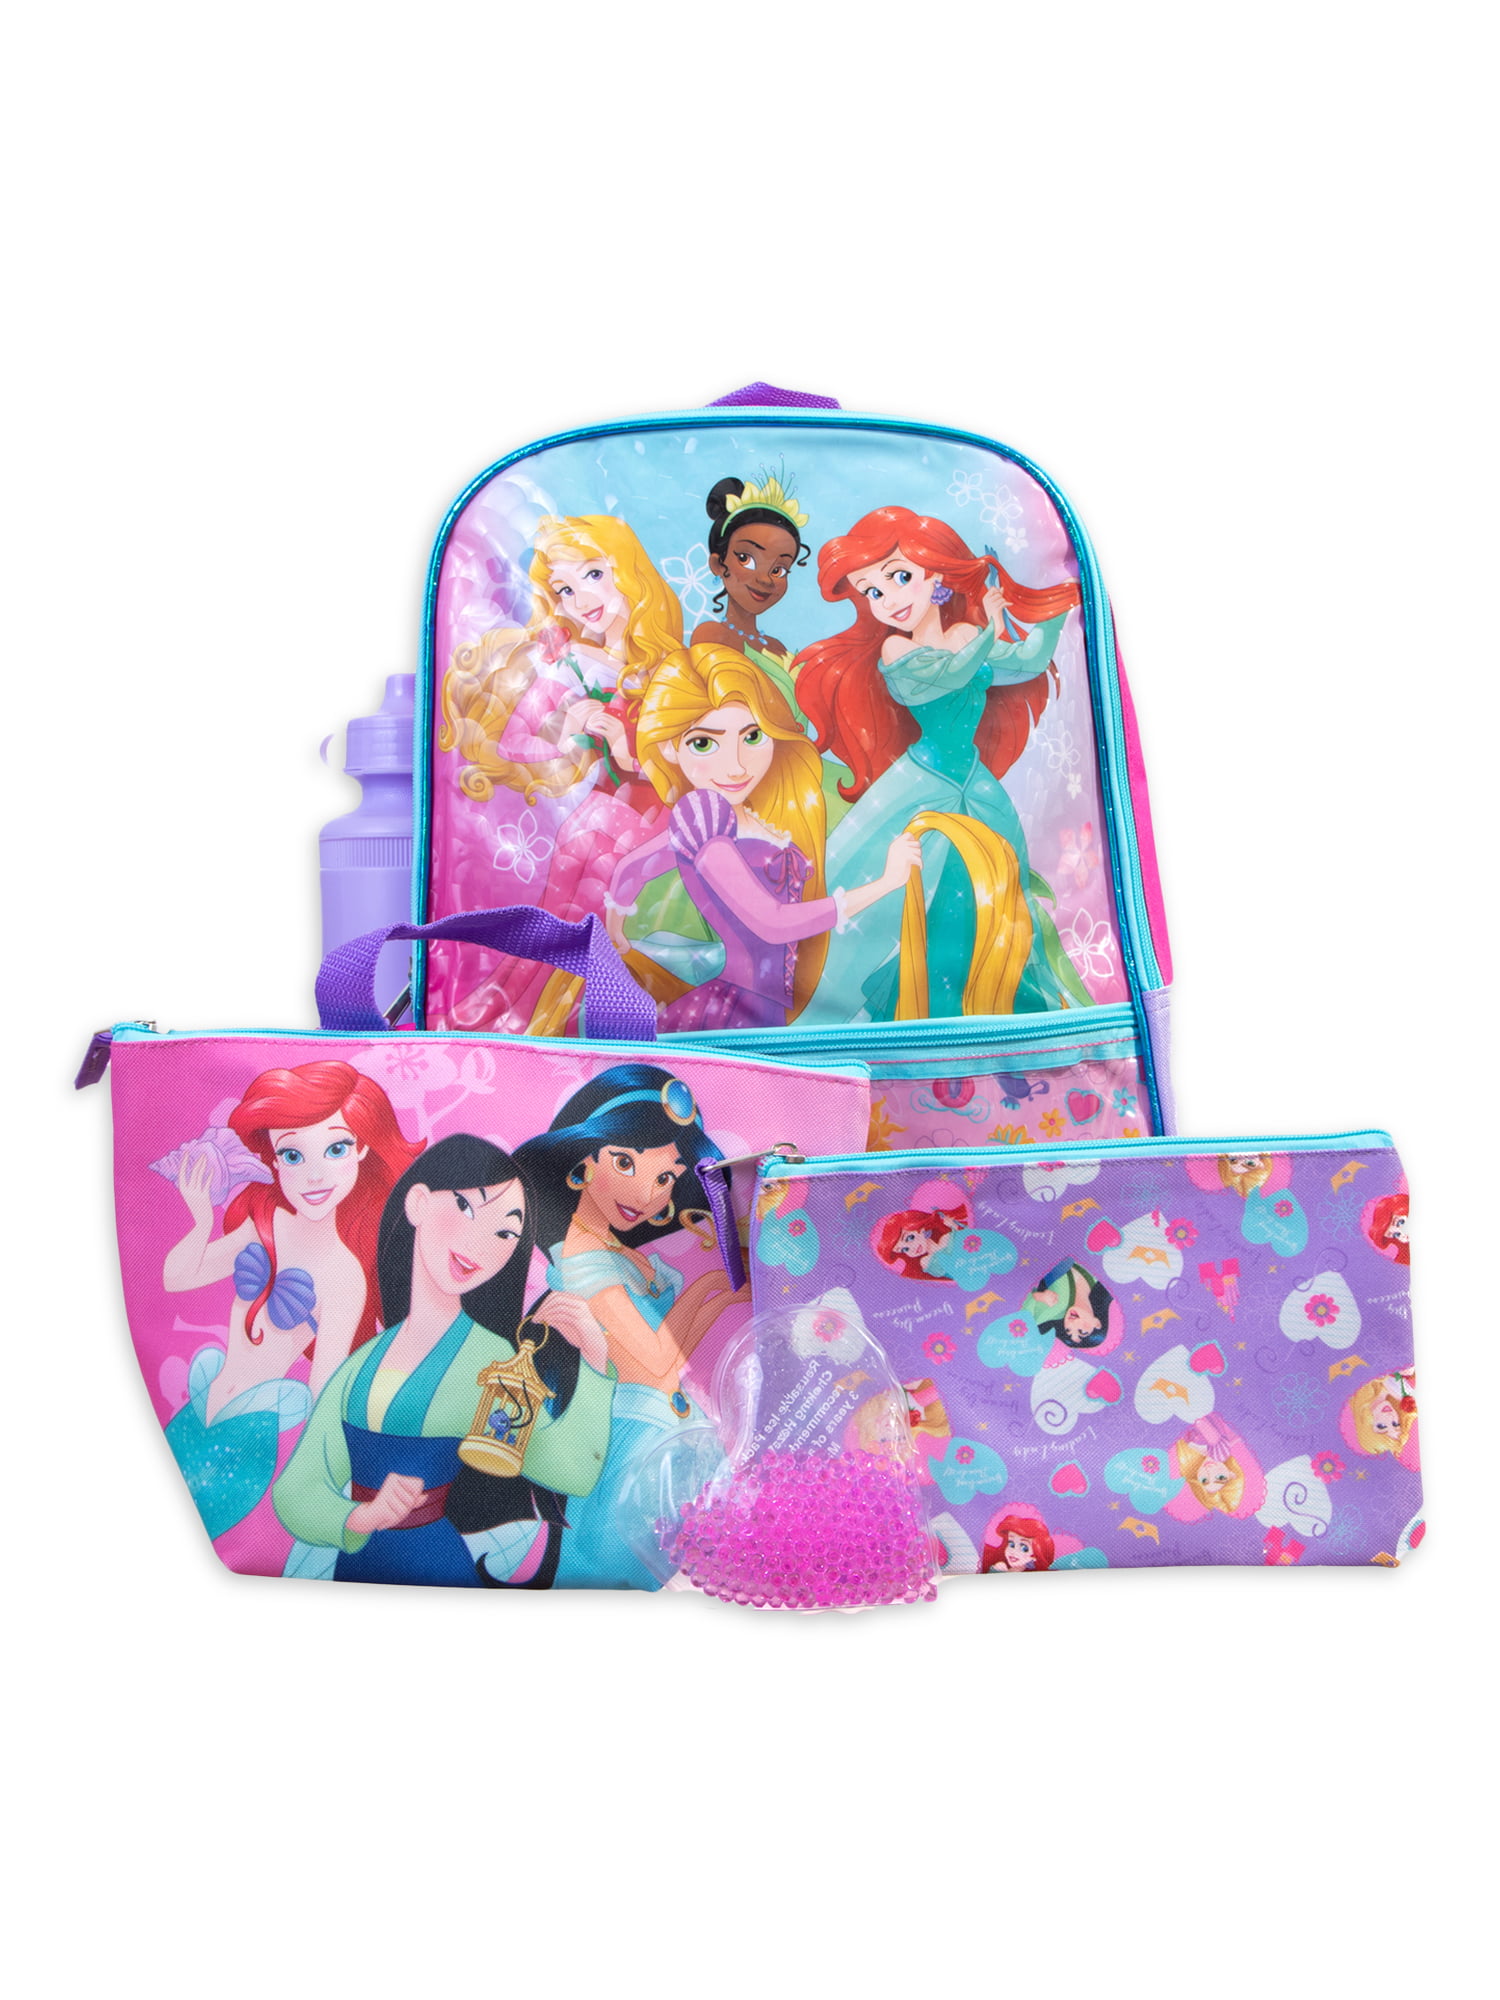  Disney Princess Backpack with Lunch Box Set - Disney Princess  Backpack for Girls Bundle with Lunch Bag, Water Bottle, Stickers, More